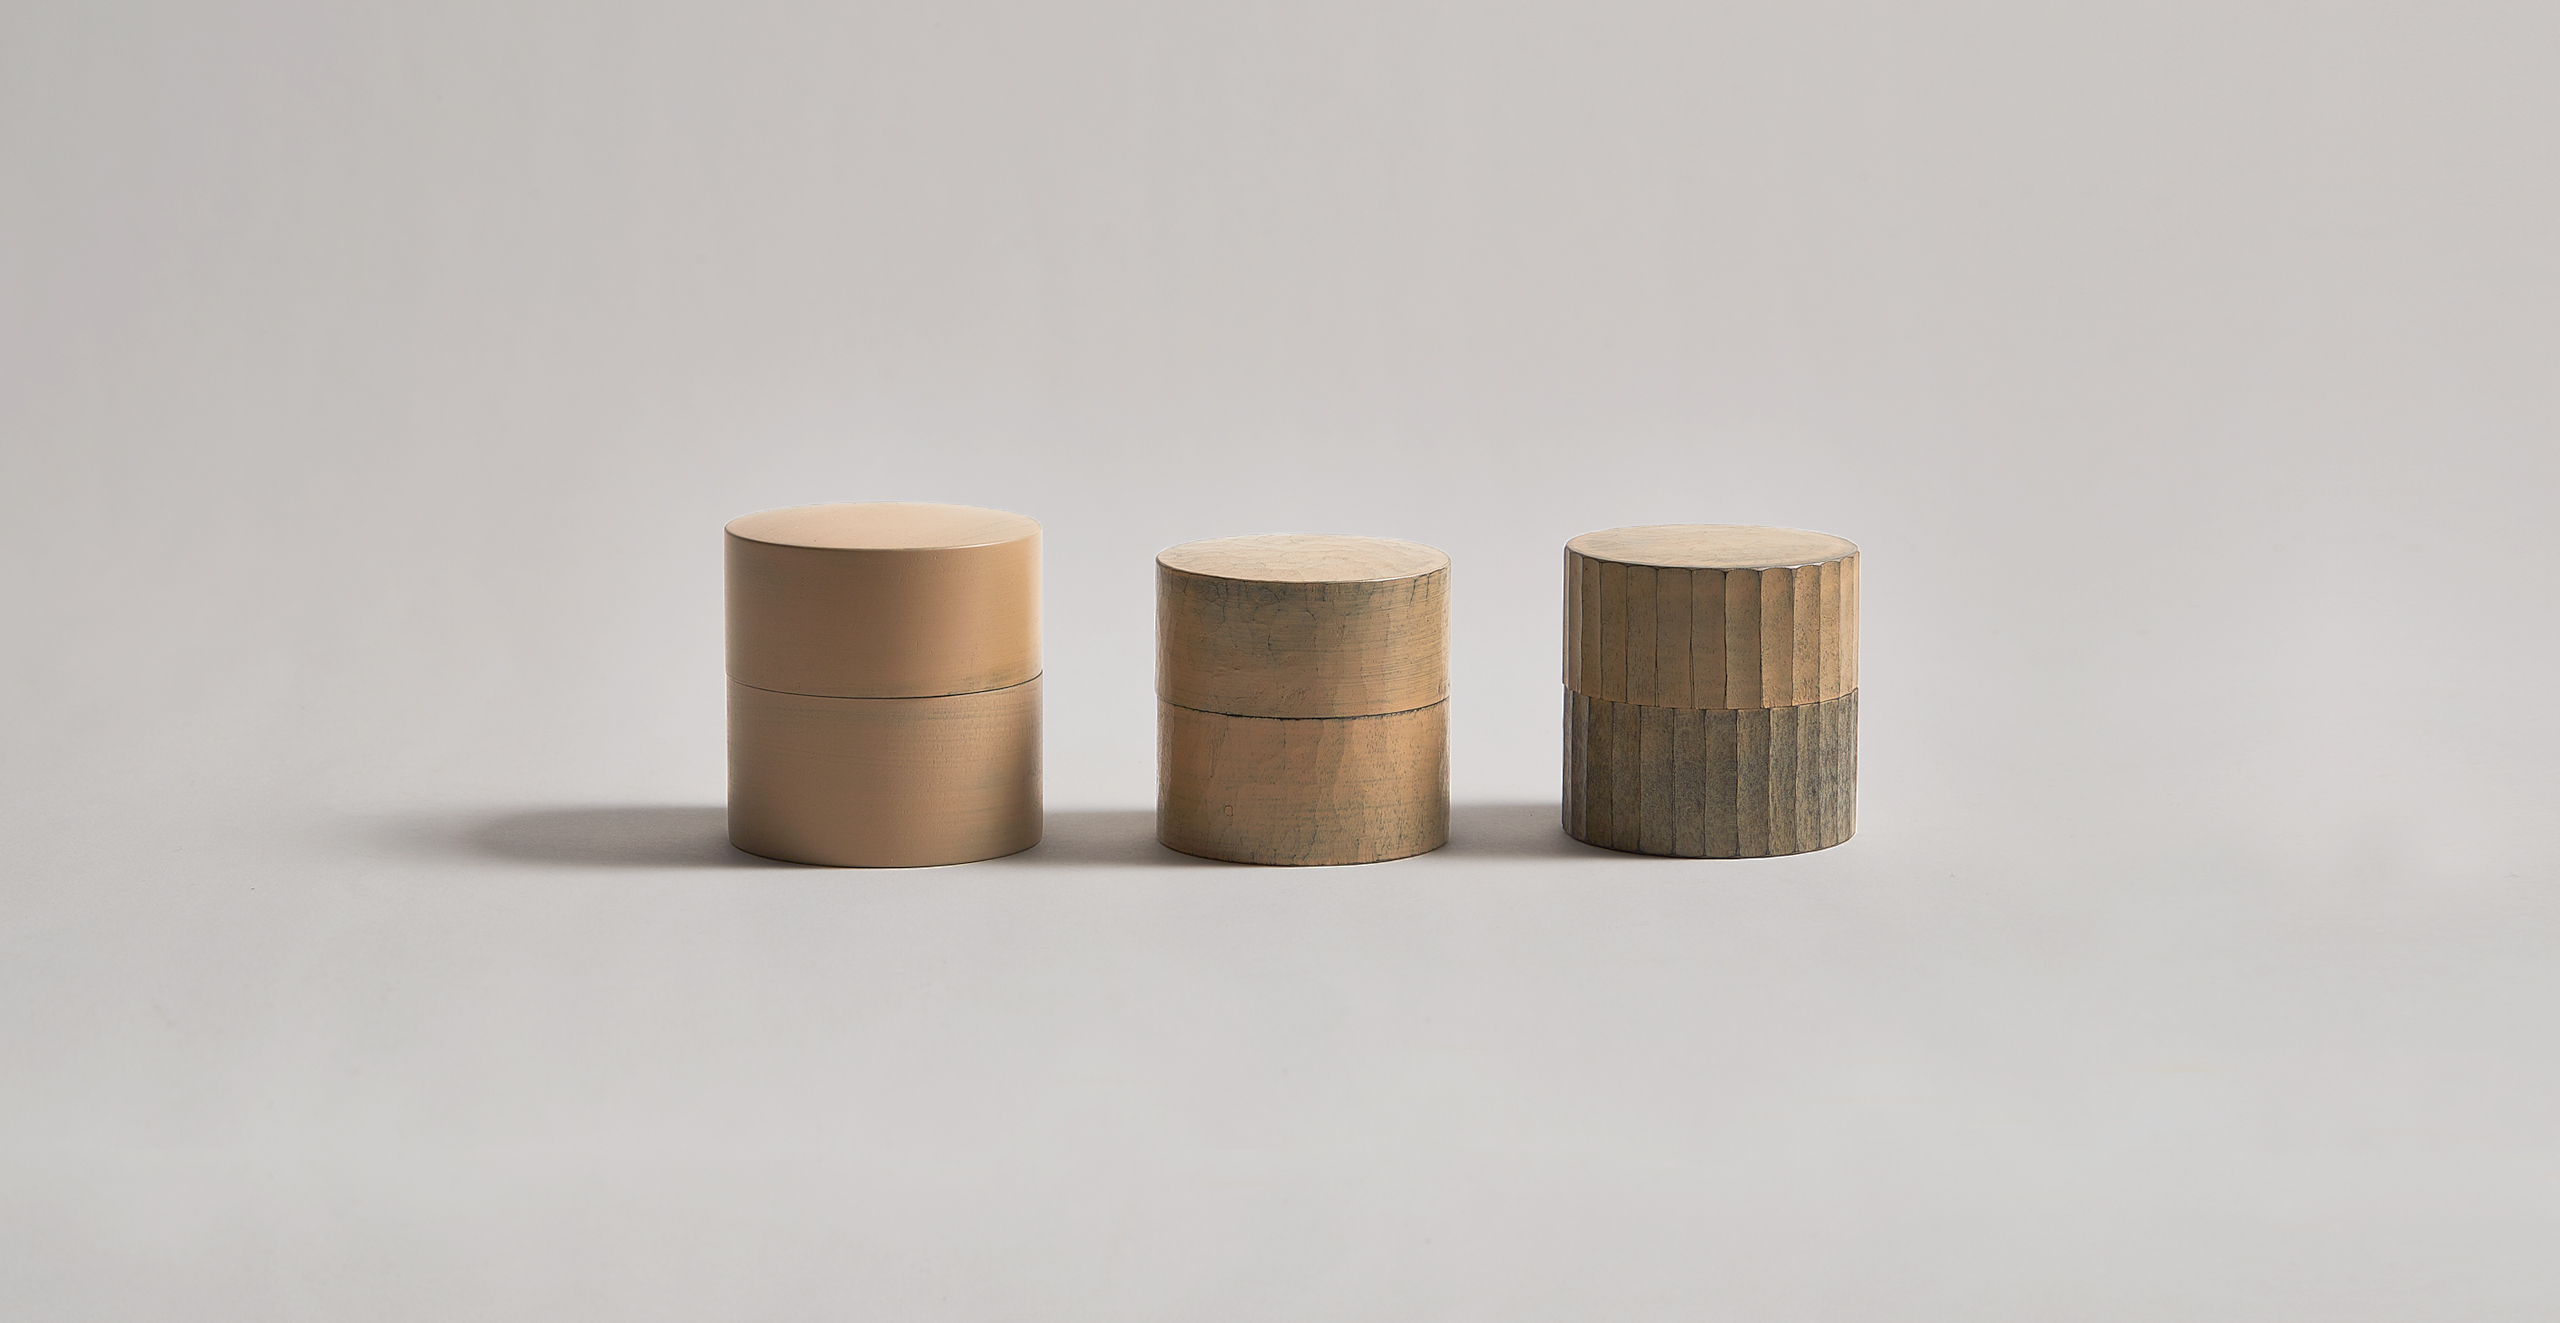 3 white urushi wood handcrafted tea canisters by Ryuji Mitani in a row